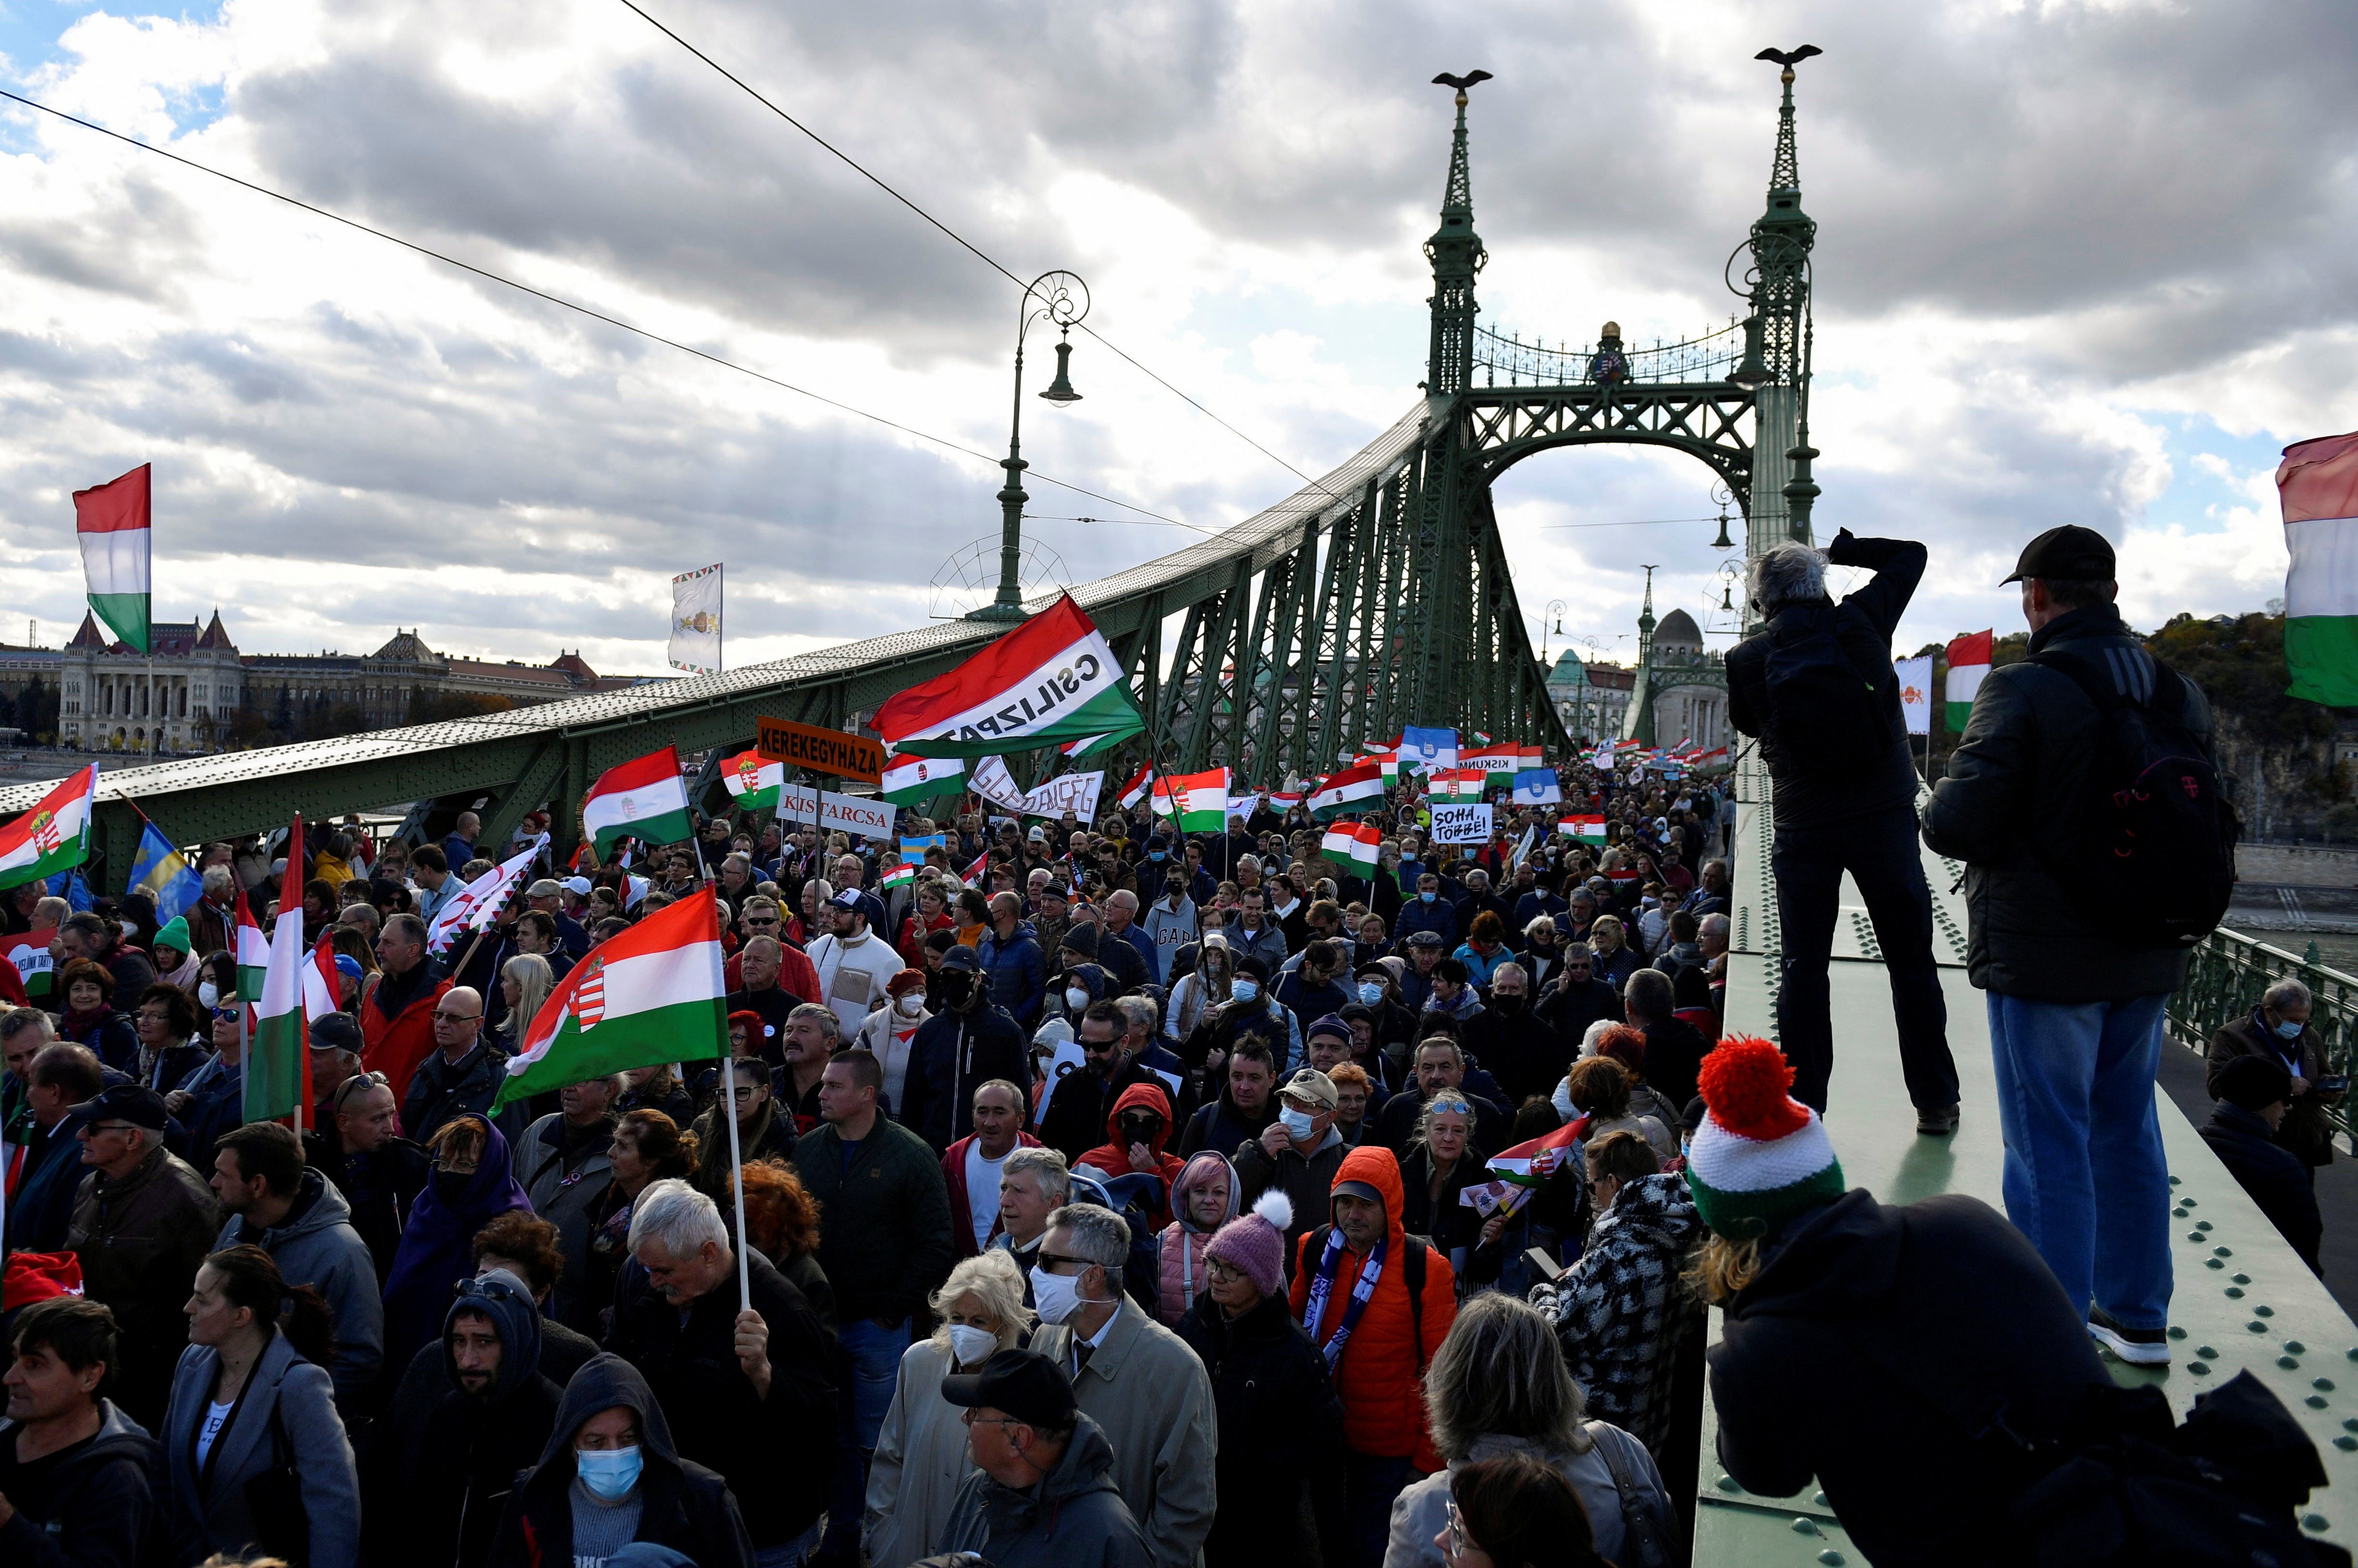 Budapest hosts rival political rallies as Hungary’s 2022 election race heats up